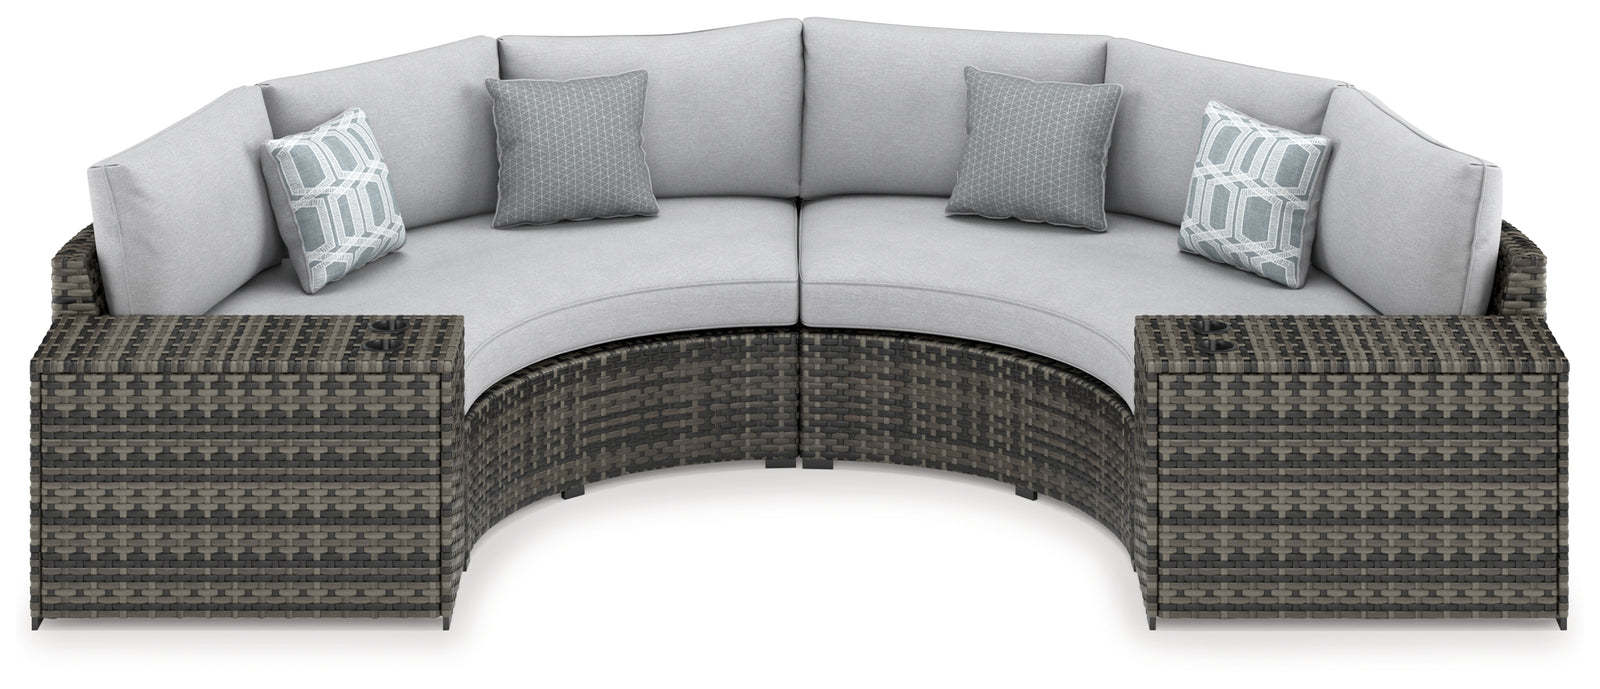 Harbor Court Gray 4-Piece Outdoor Sectional P459P7